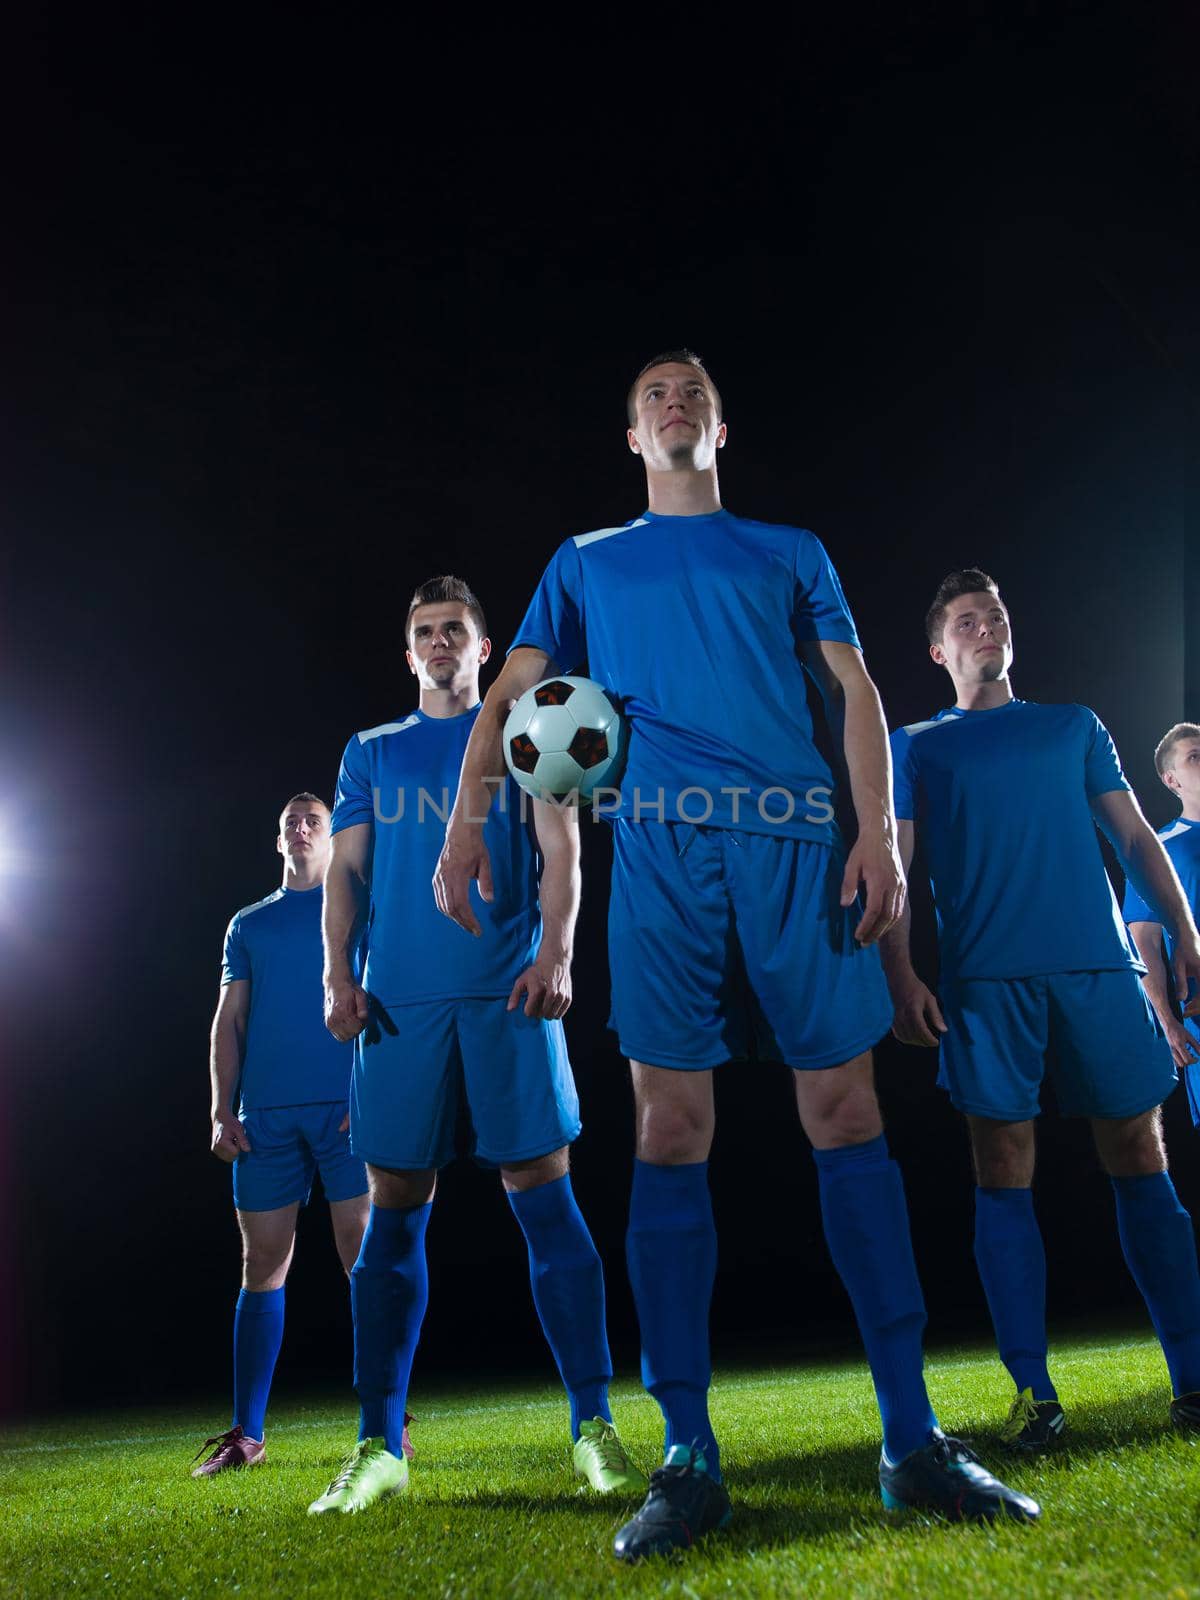 soccer players team by dotshock